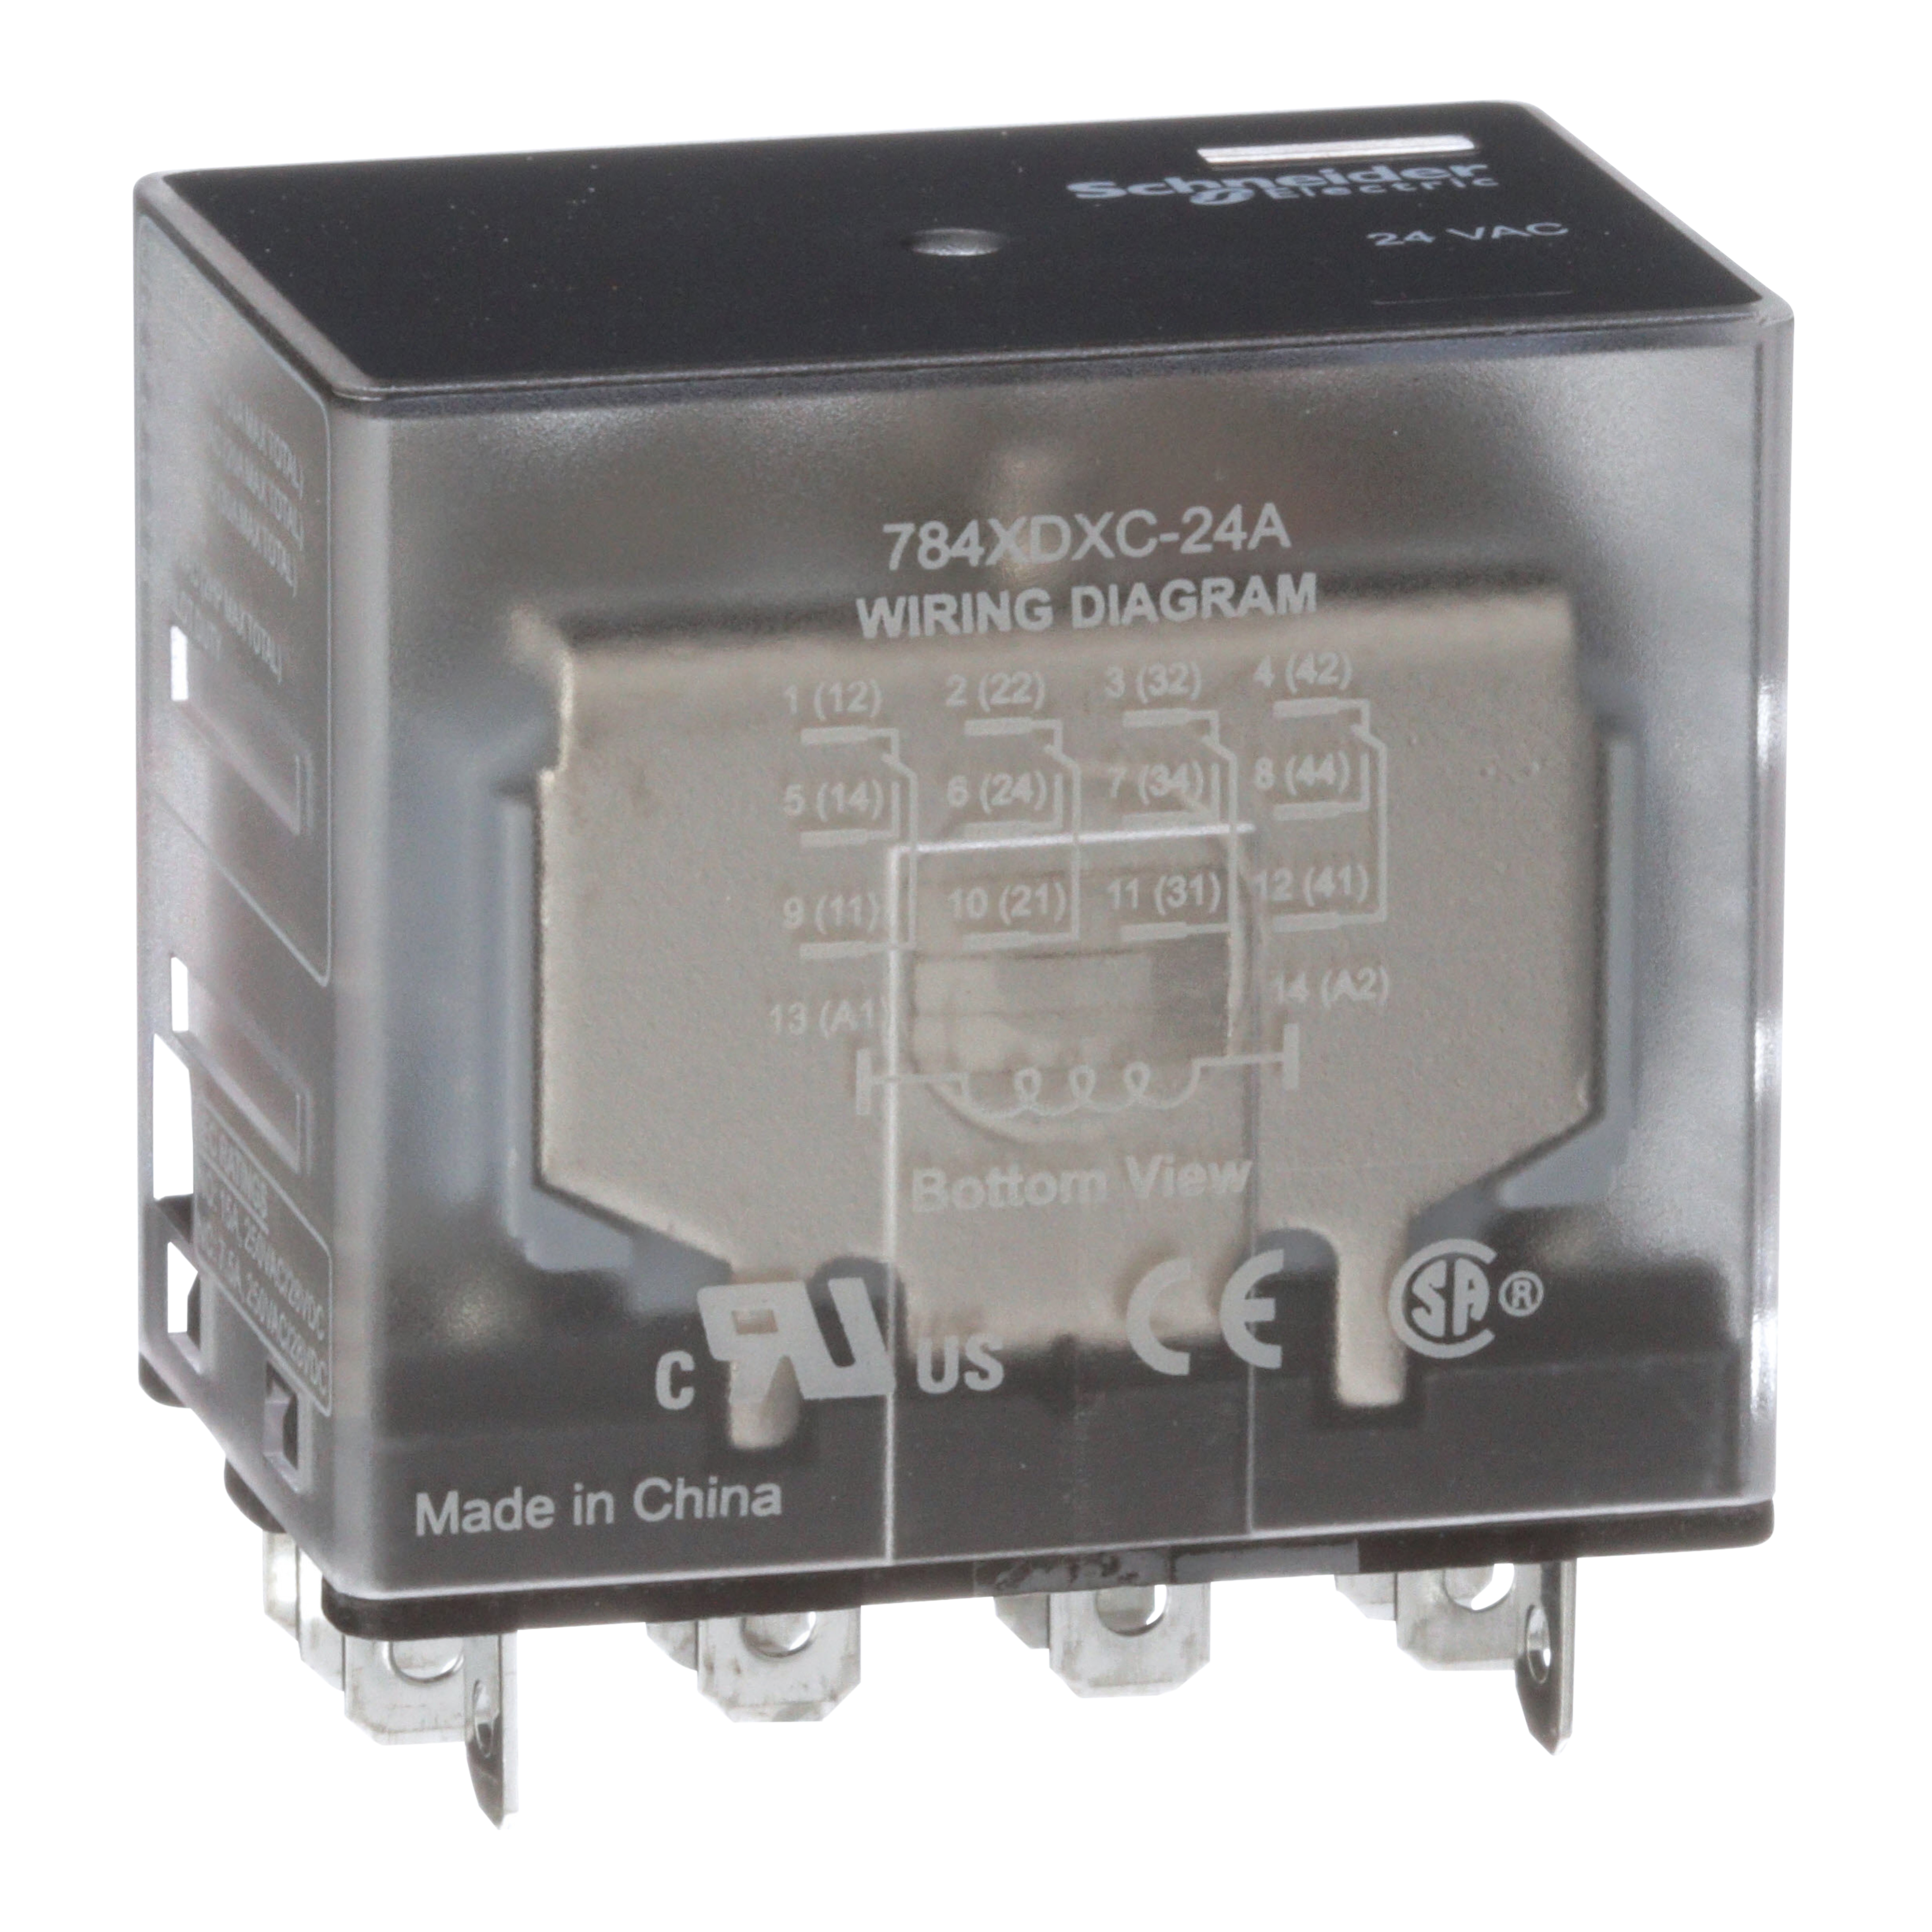 Power relay, SE Relays, 15A, 4PDT, 24 VAC, clear cover